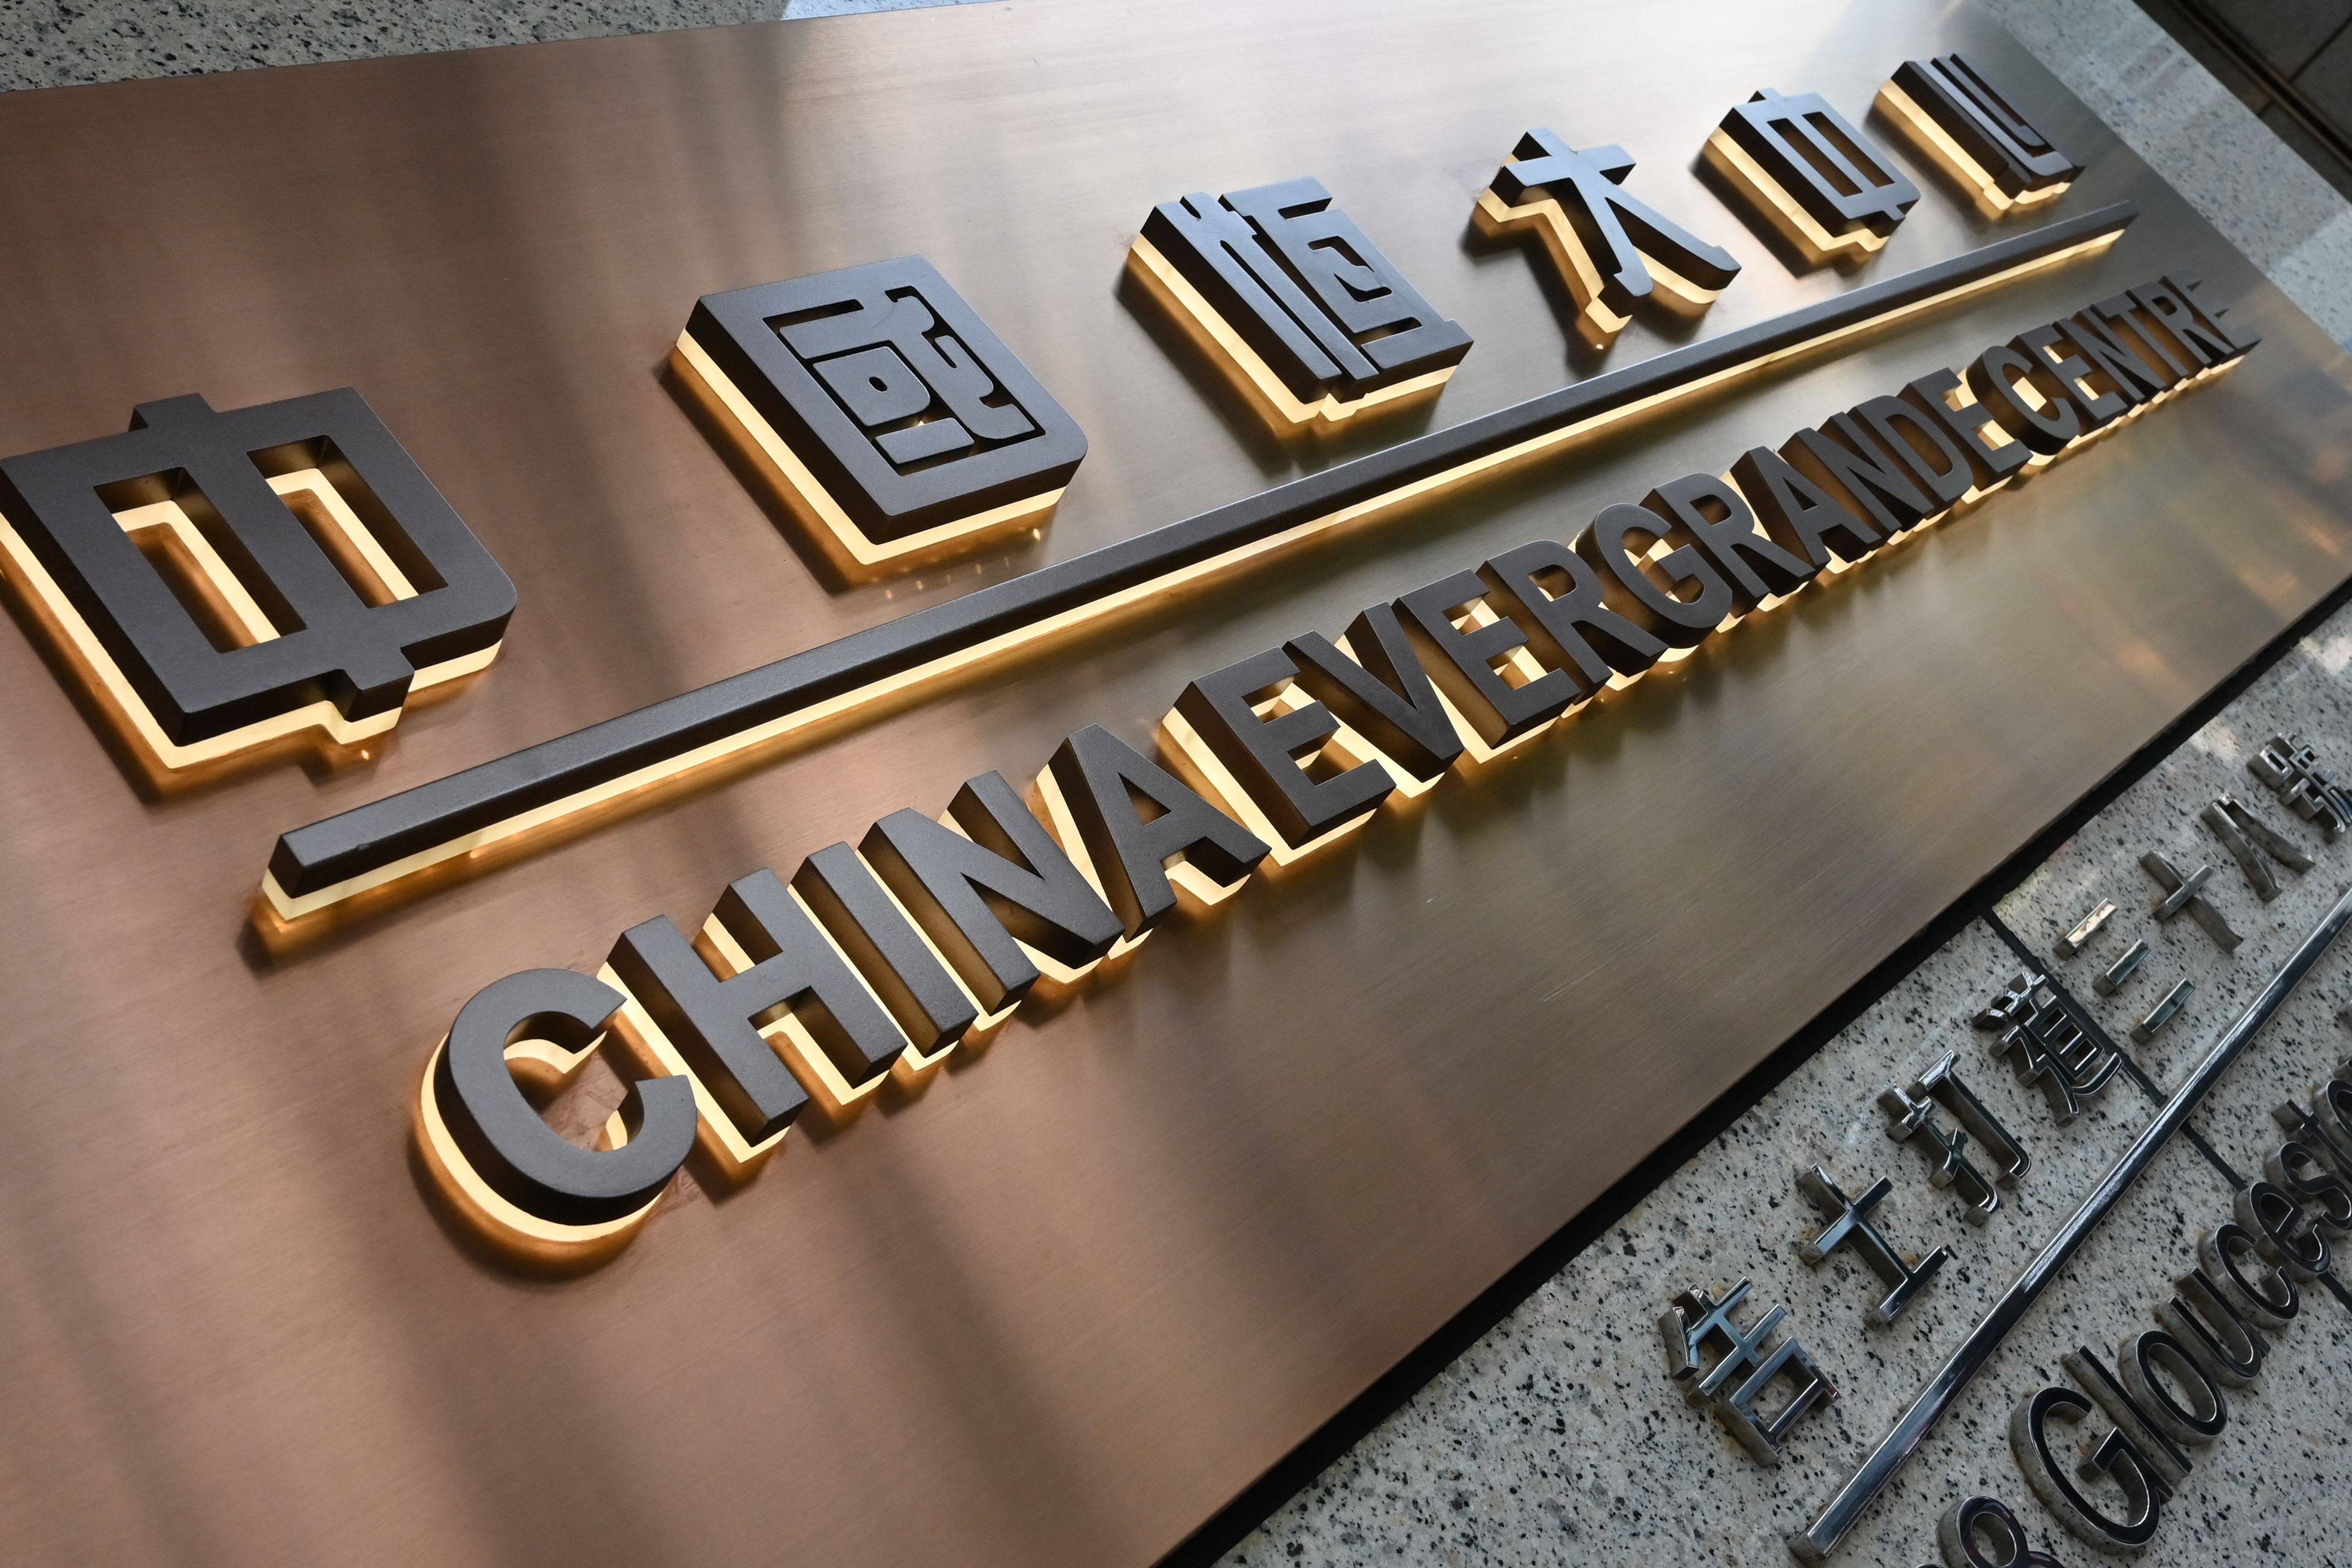 The China Evergrande Centre in Hong Kong on September 15, 2021. Heavily indebted Chinese property giant Evergrande resumed trading on the Hong Kong Stock Exchange on October 3, 2023, according to a statement on the bourse’s website. Photo: AFP